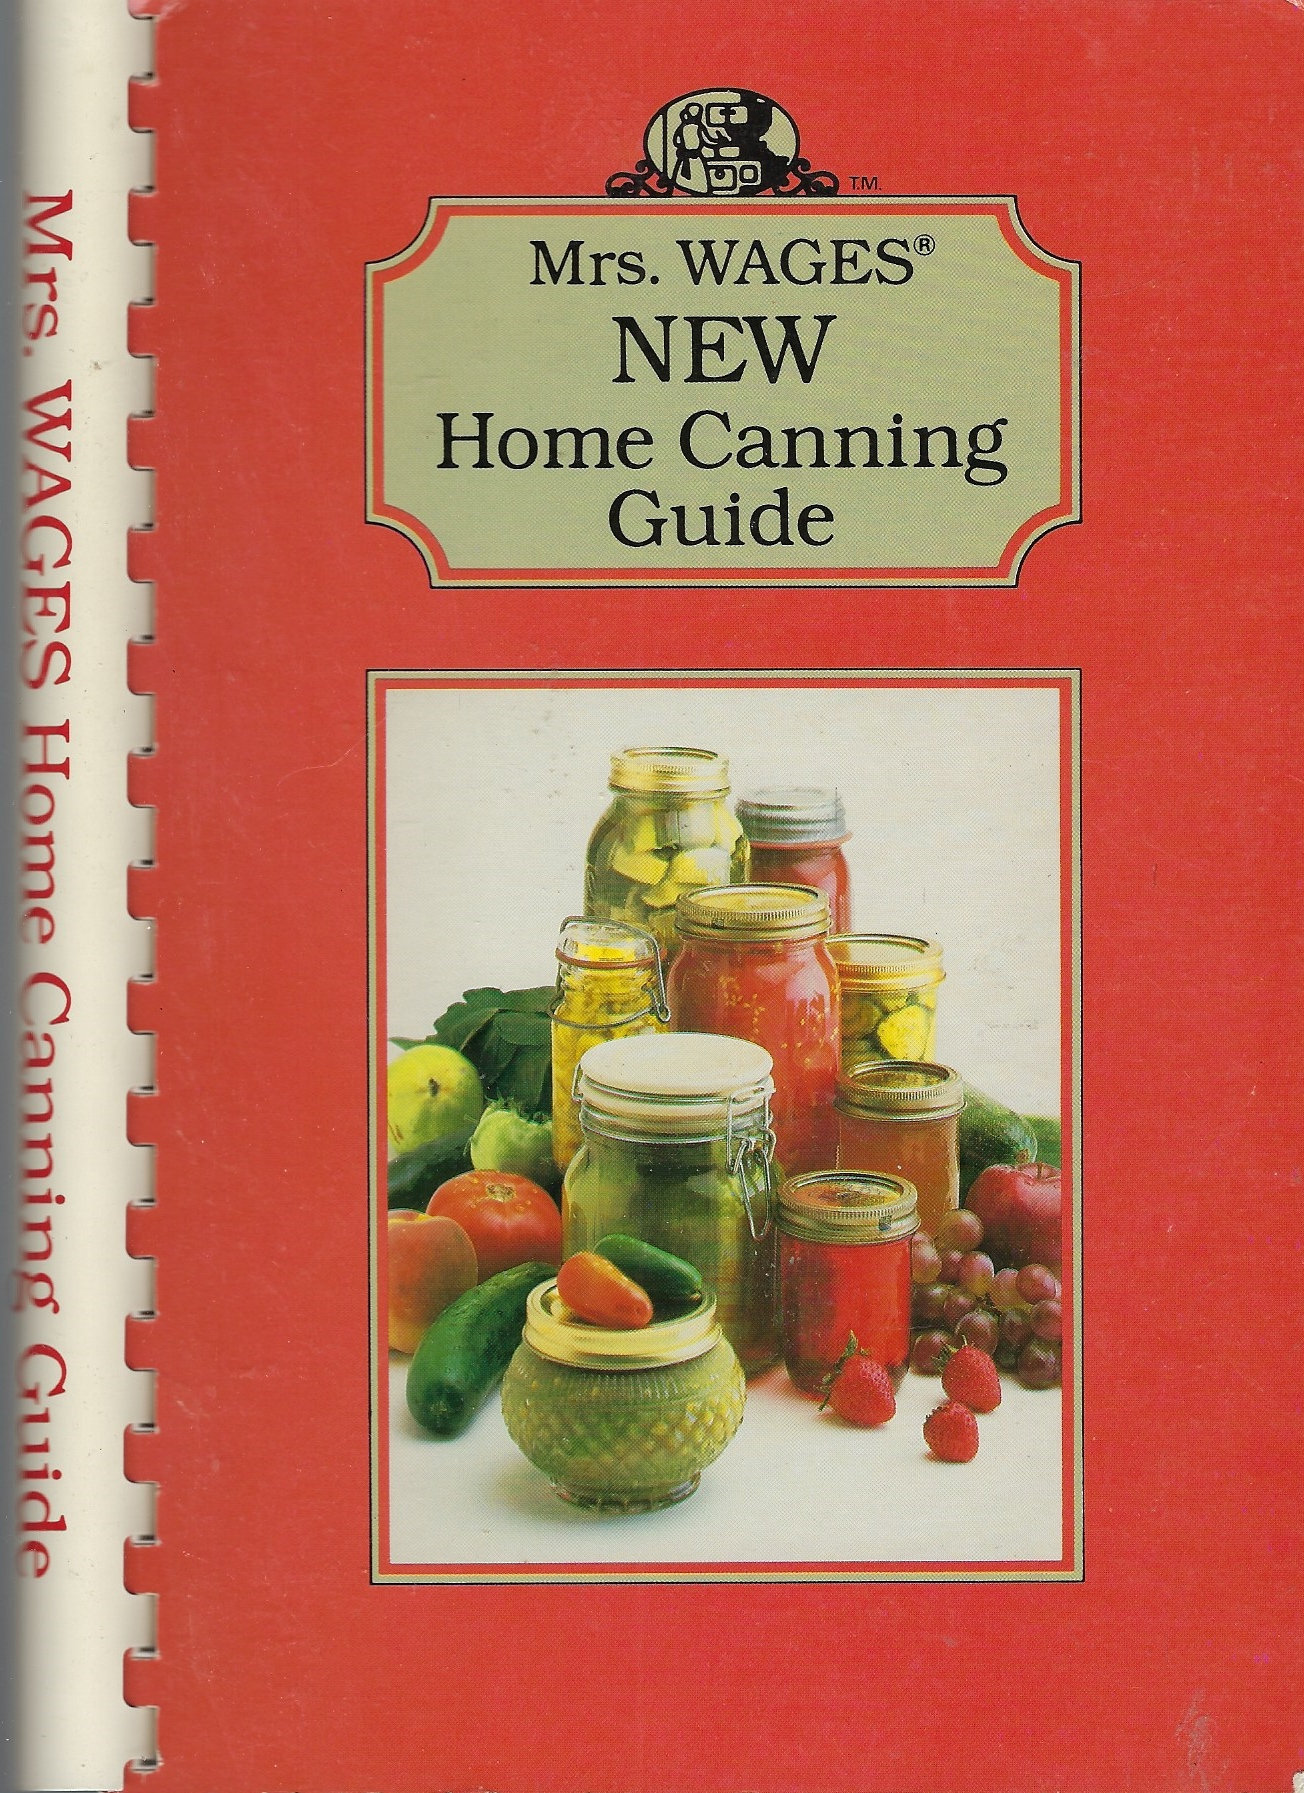 Mrs Wages New Home Canning Guide Vintage 1986 Cookbook By Gale R Ammerman Preserving Food How-To Basics Pressure Cooking Rare Cook Book